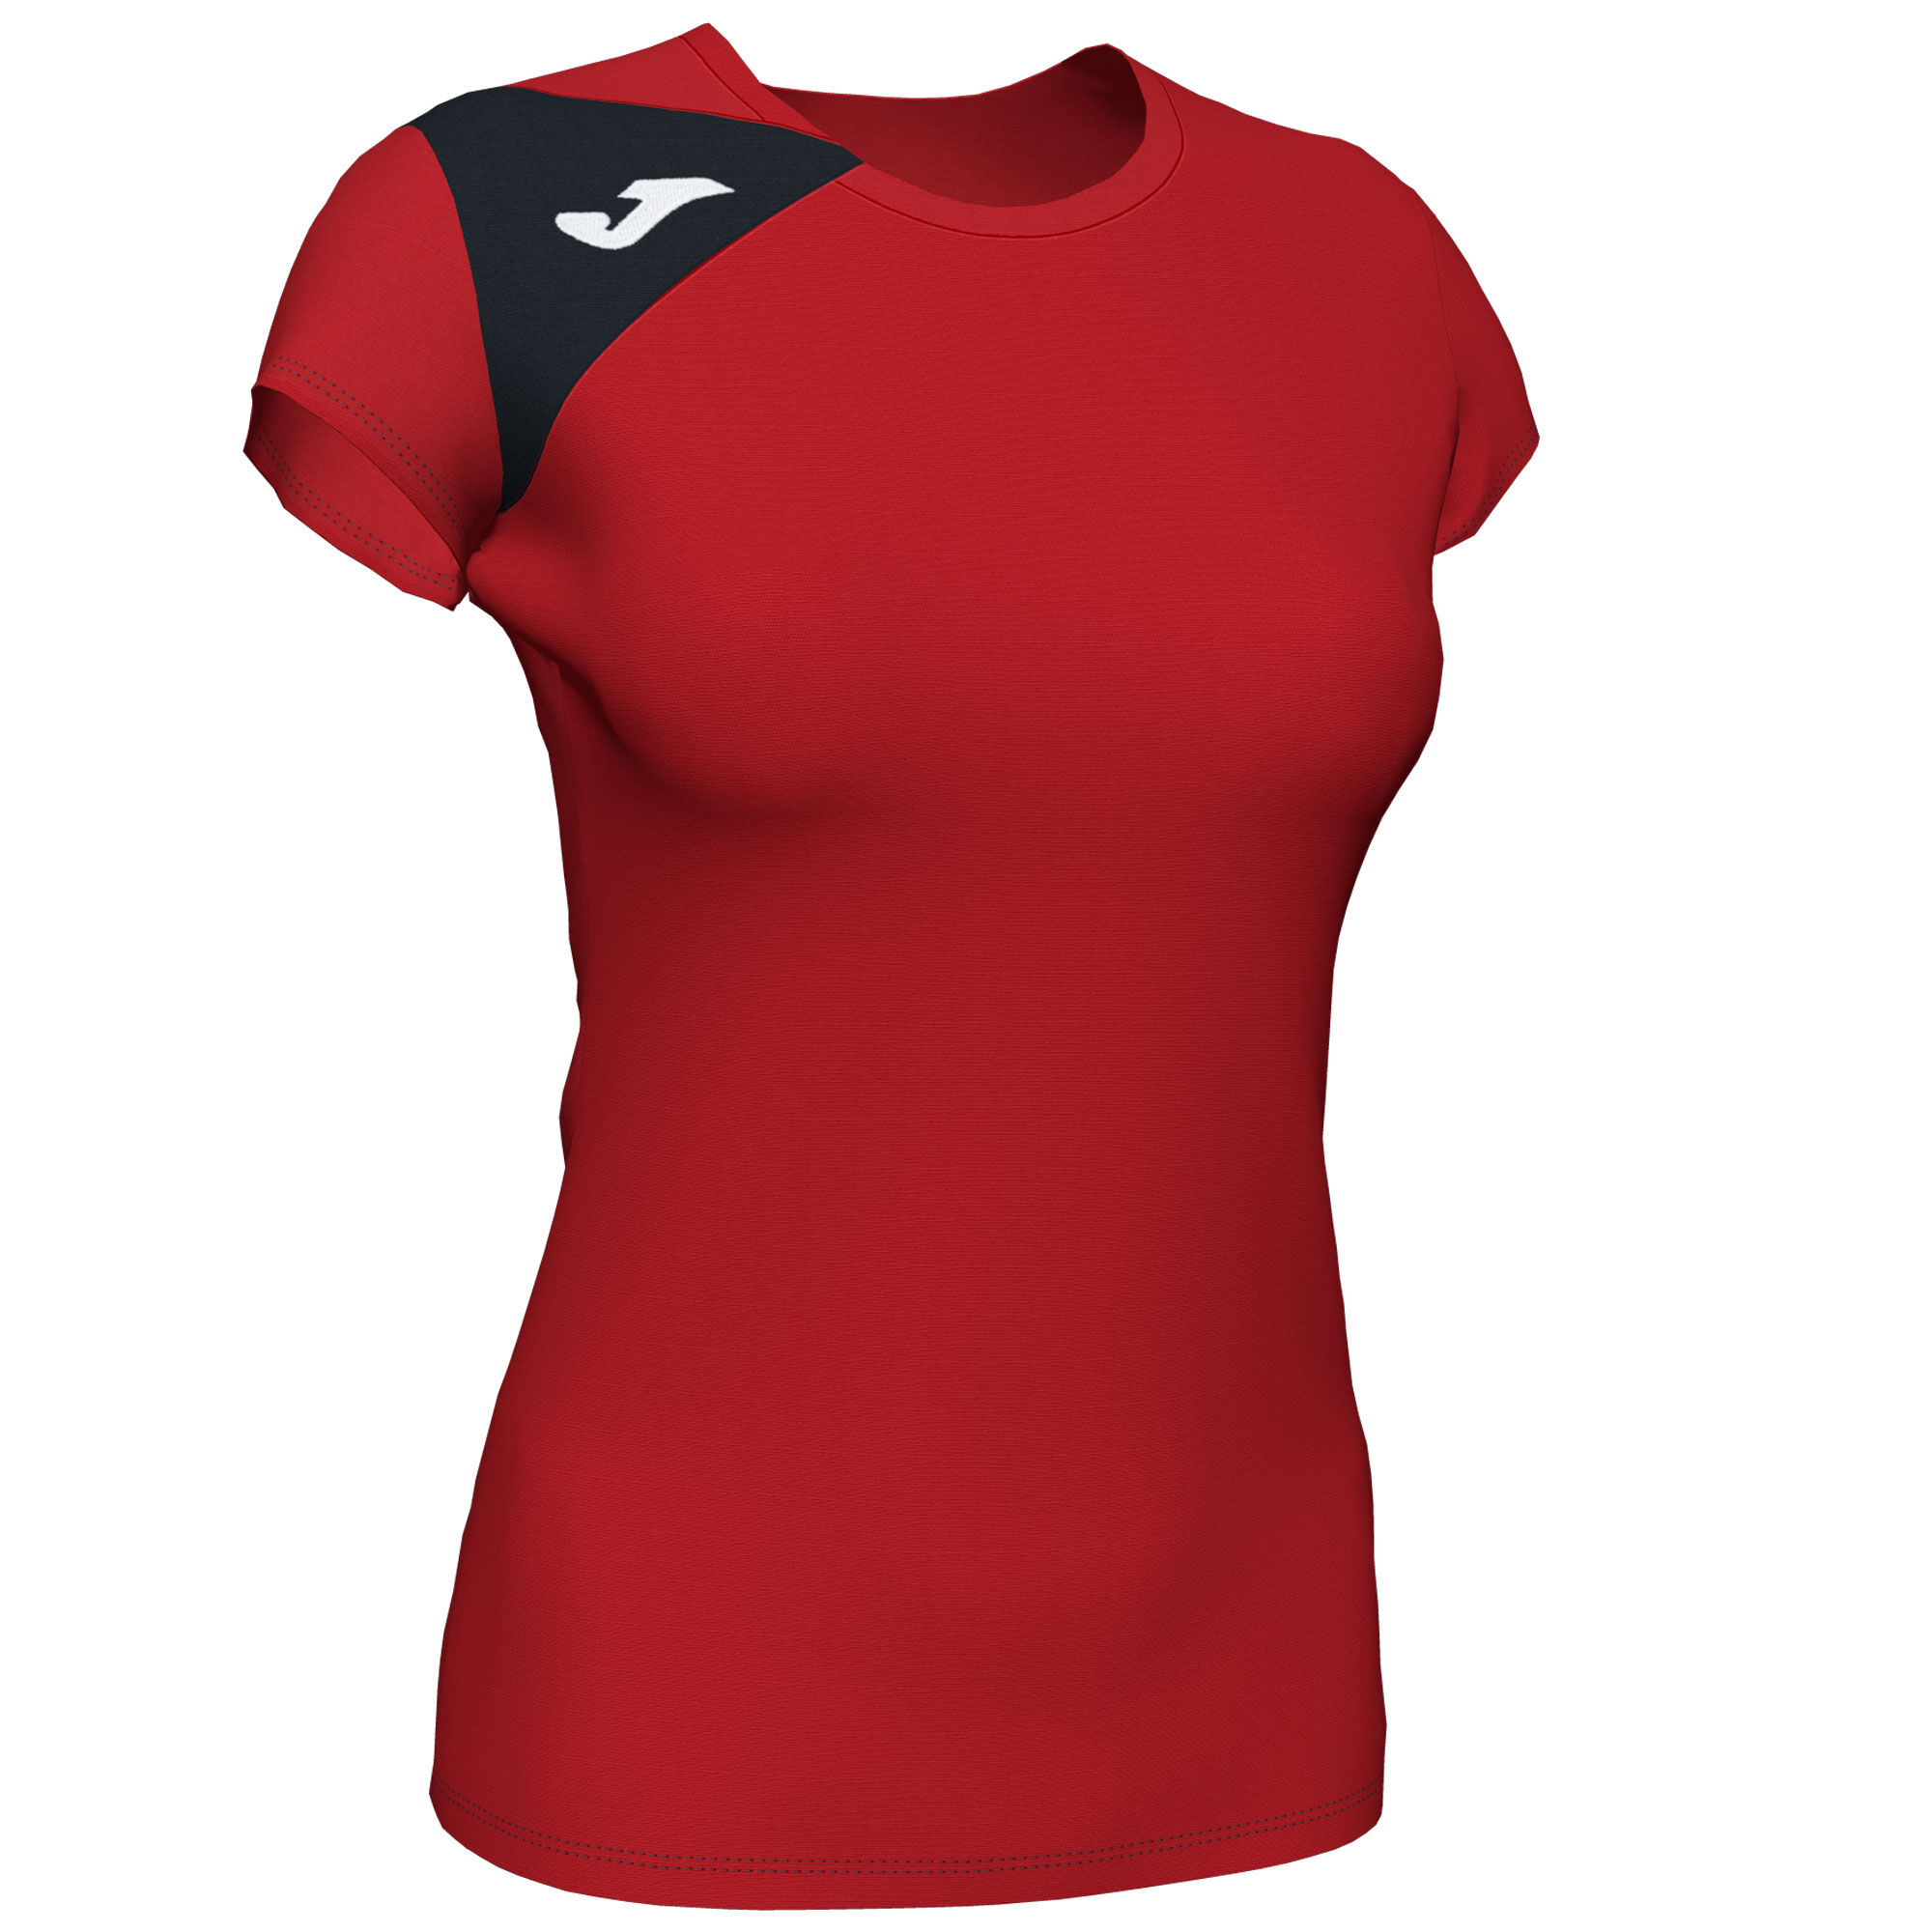 MAILLOT MANCHES COURTES FEMME SPIKE II ROUGE NOIR